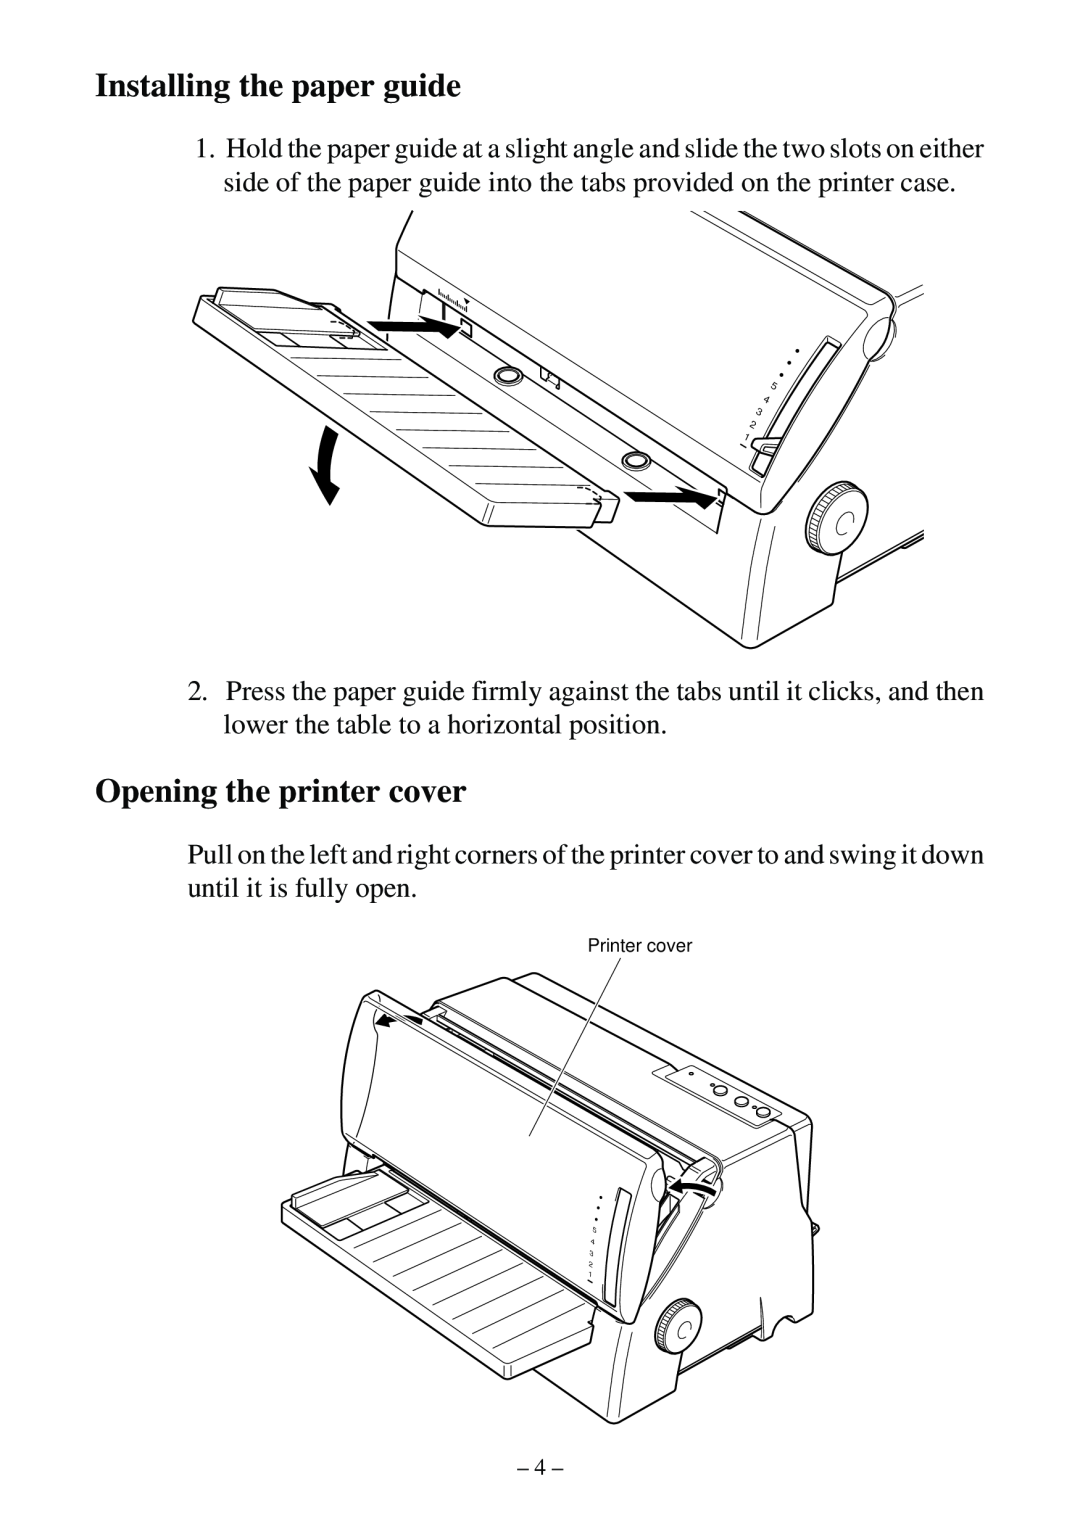 Star Micronics LC-500 user manual Installing the paper guide, Opening the printer cover, Printer cover 